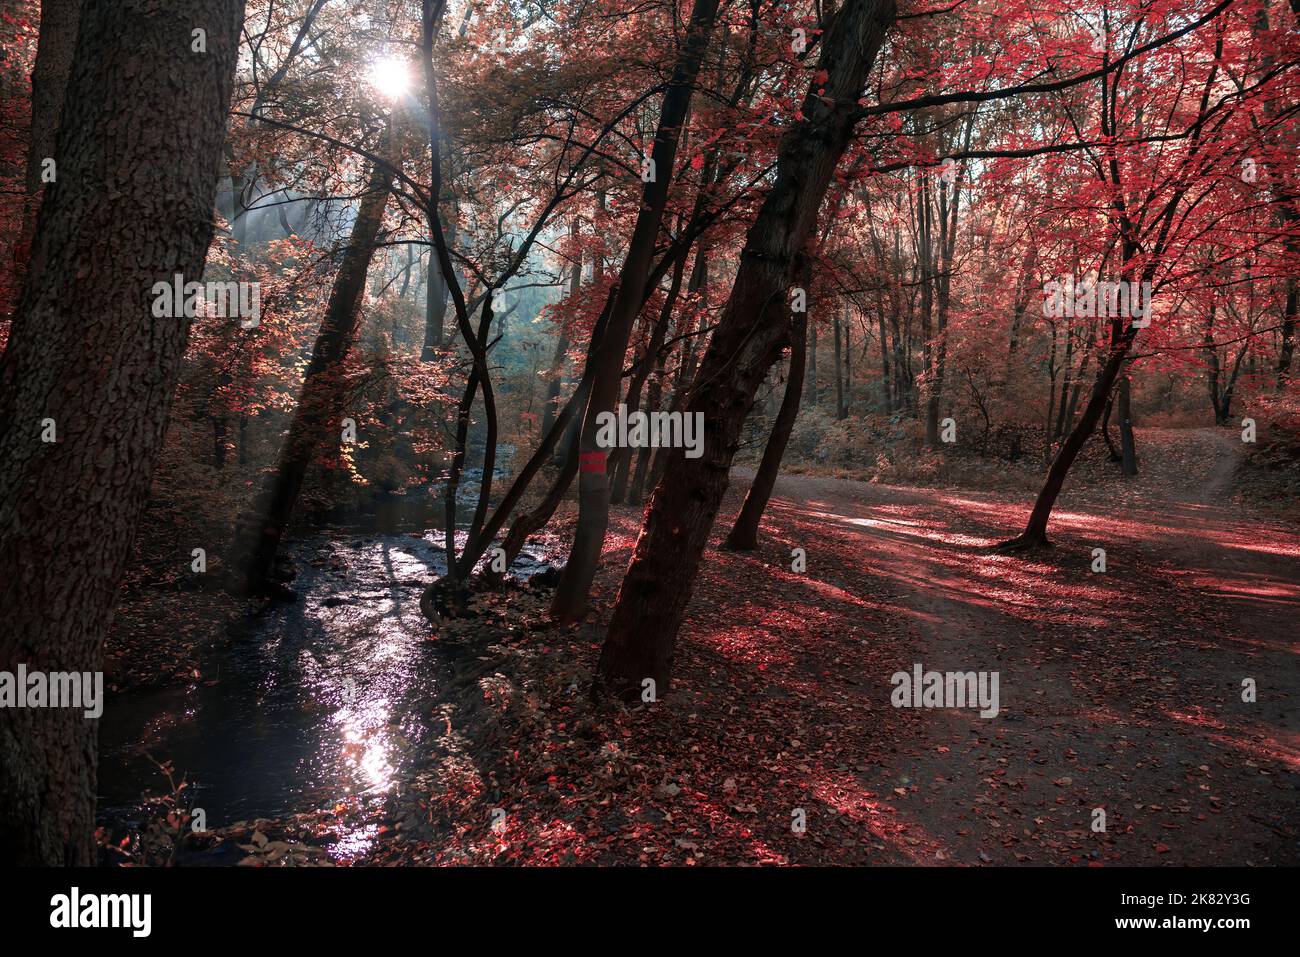 Beautiful forest photo with sun shining through leaves Stock Photo